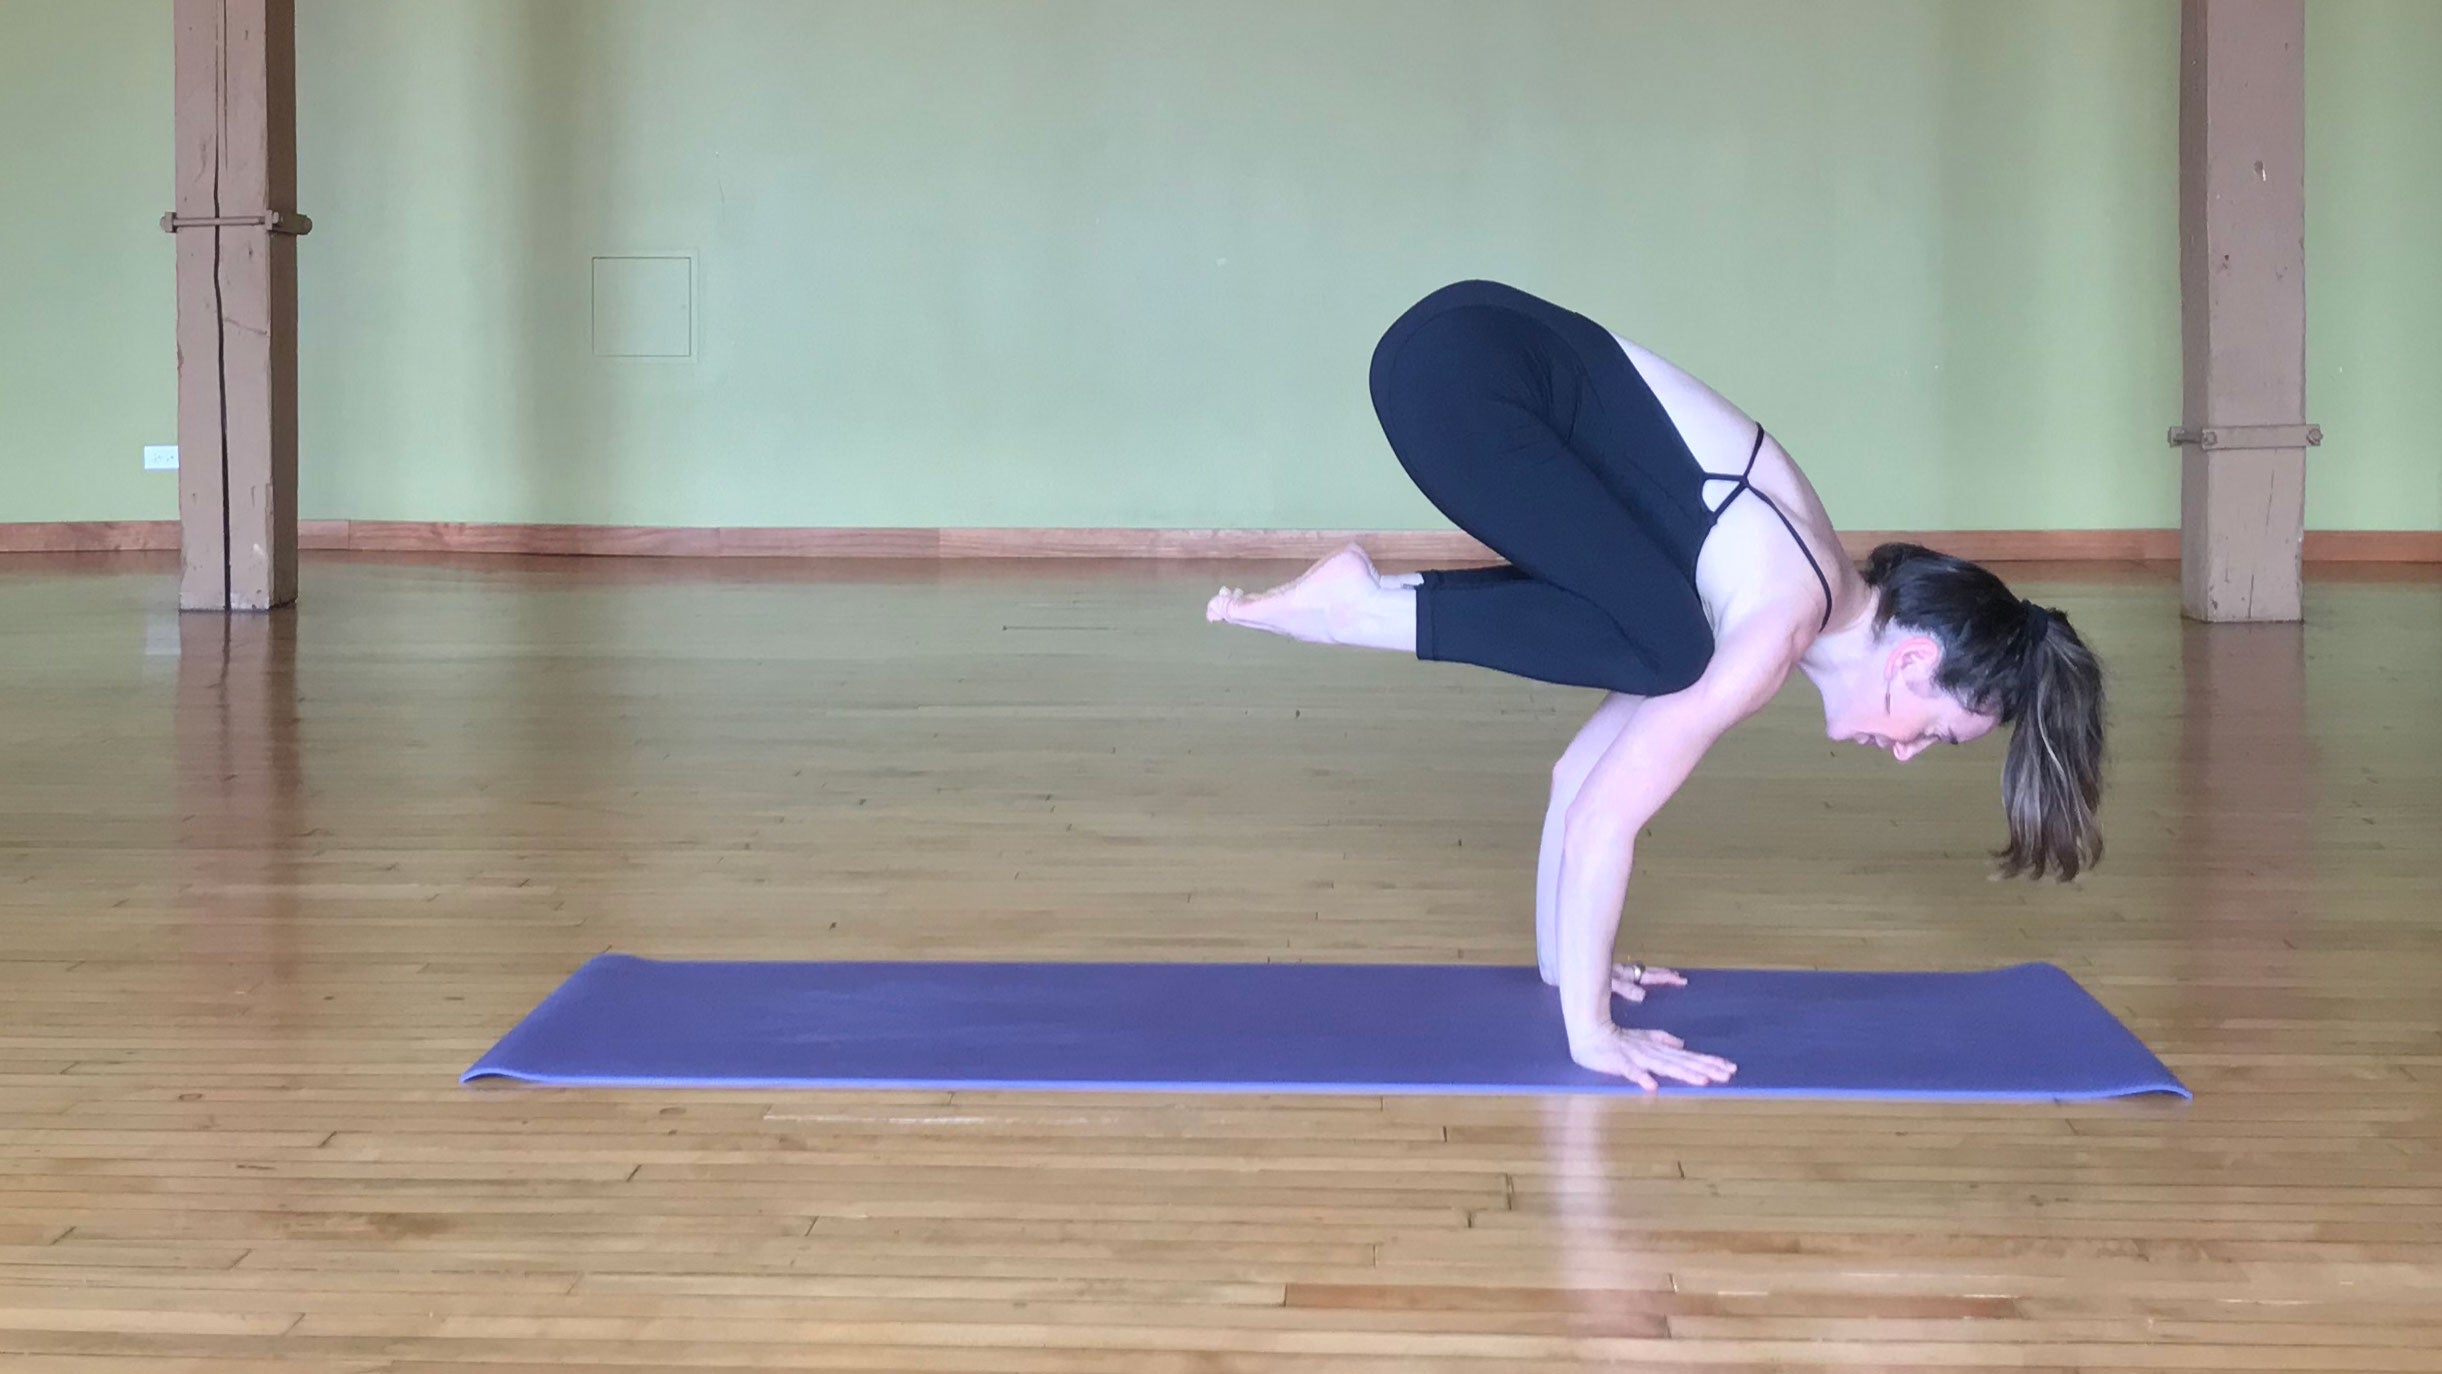 10 Essential Yoga Poses to Know Before Your First Class | No Meat Athlete